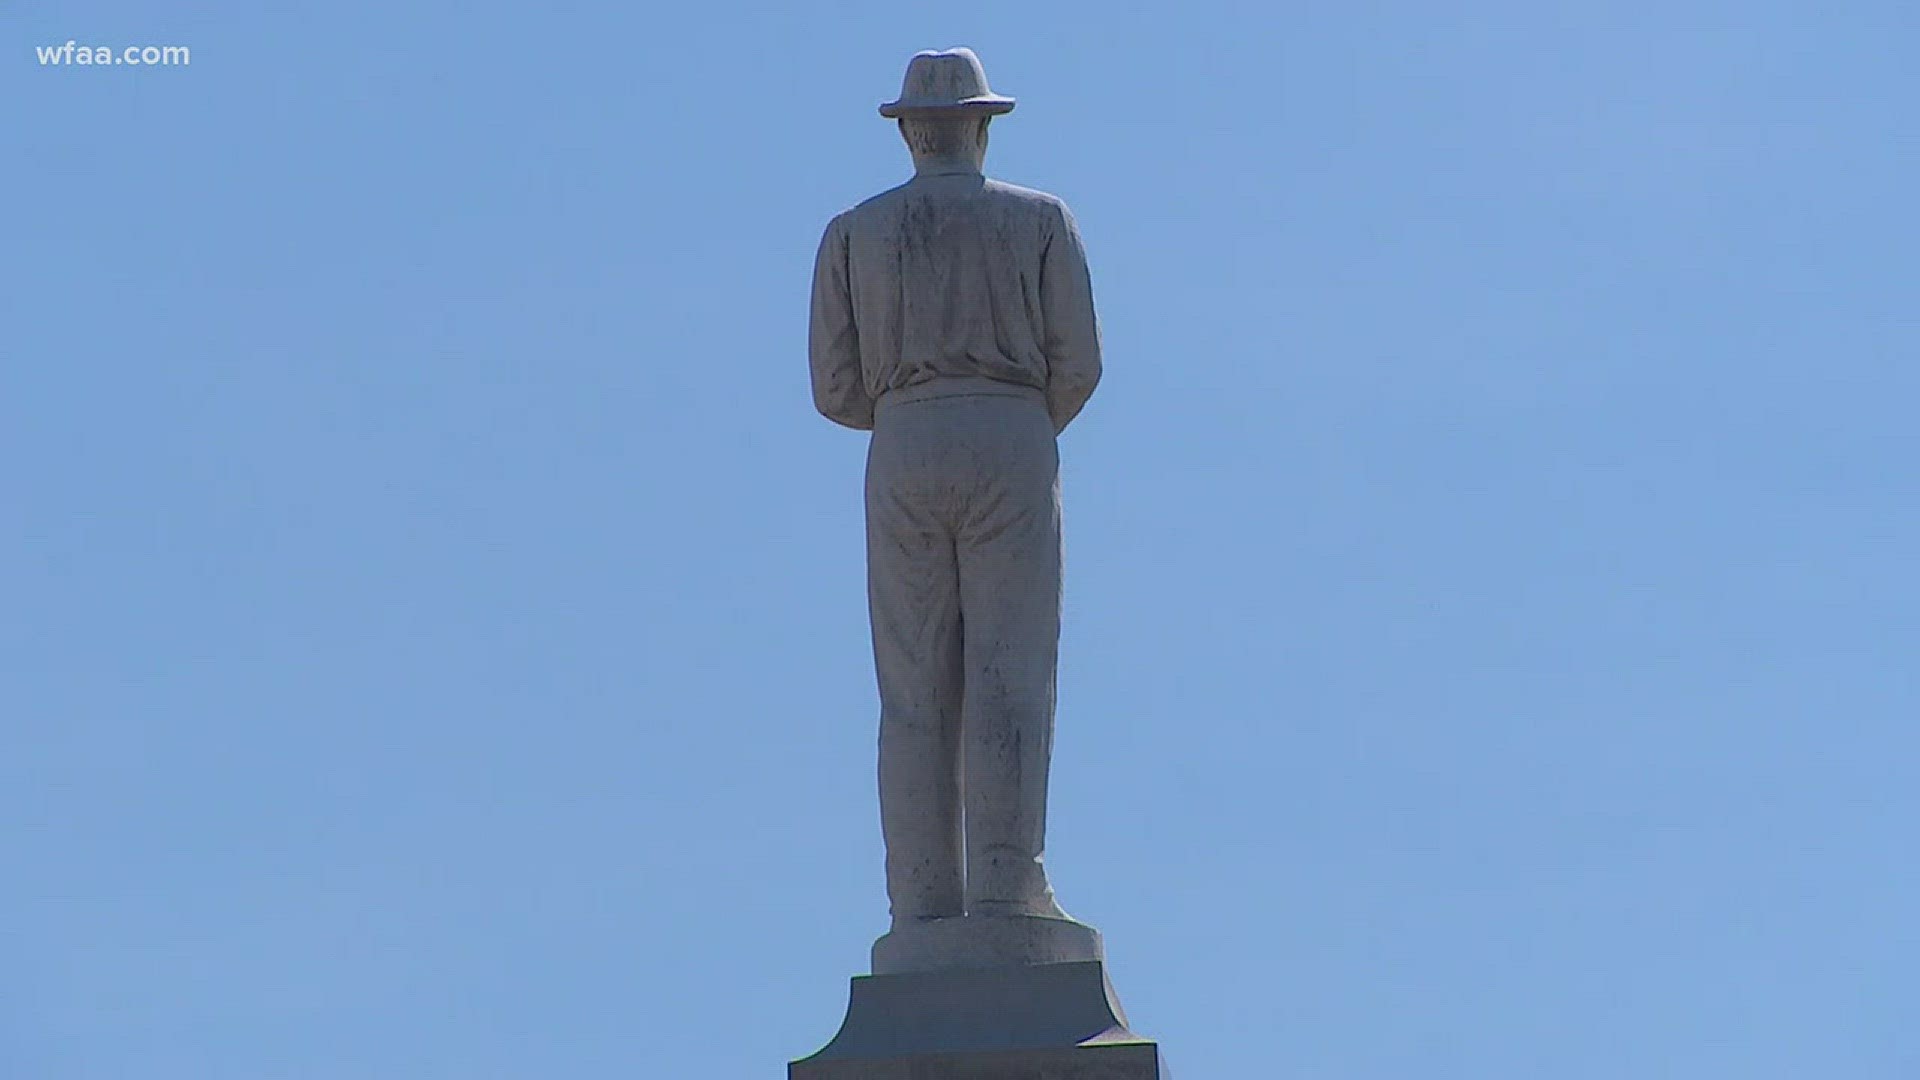 No clear answers yet. We examine what could happen to Dallas' confederate monuments.